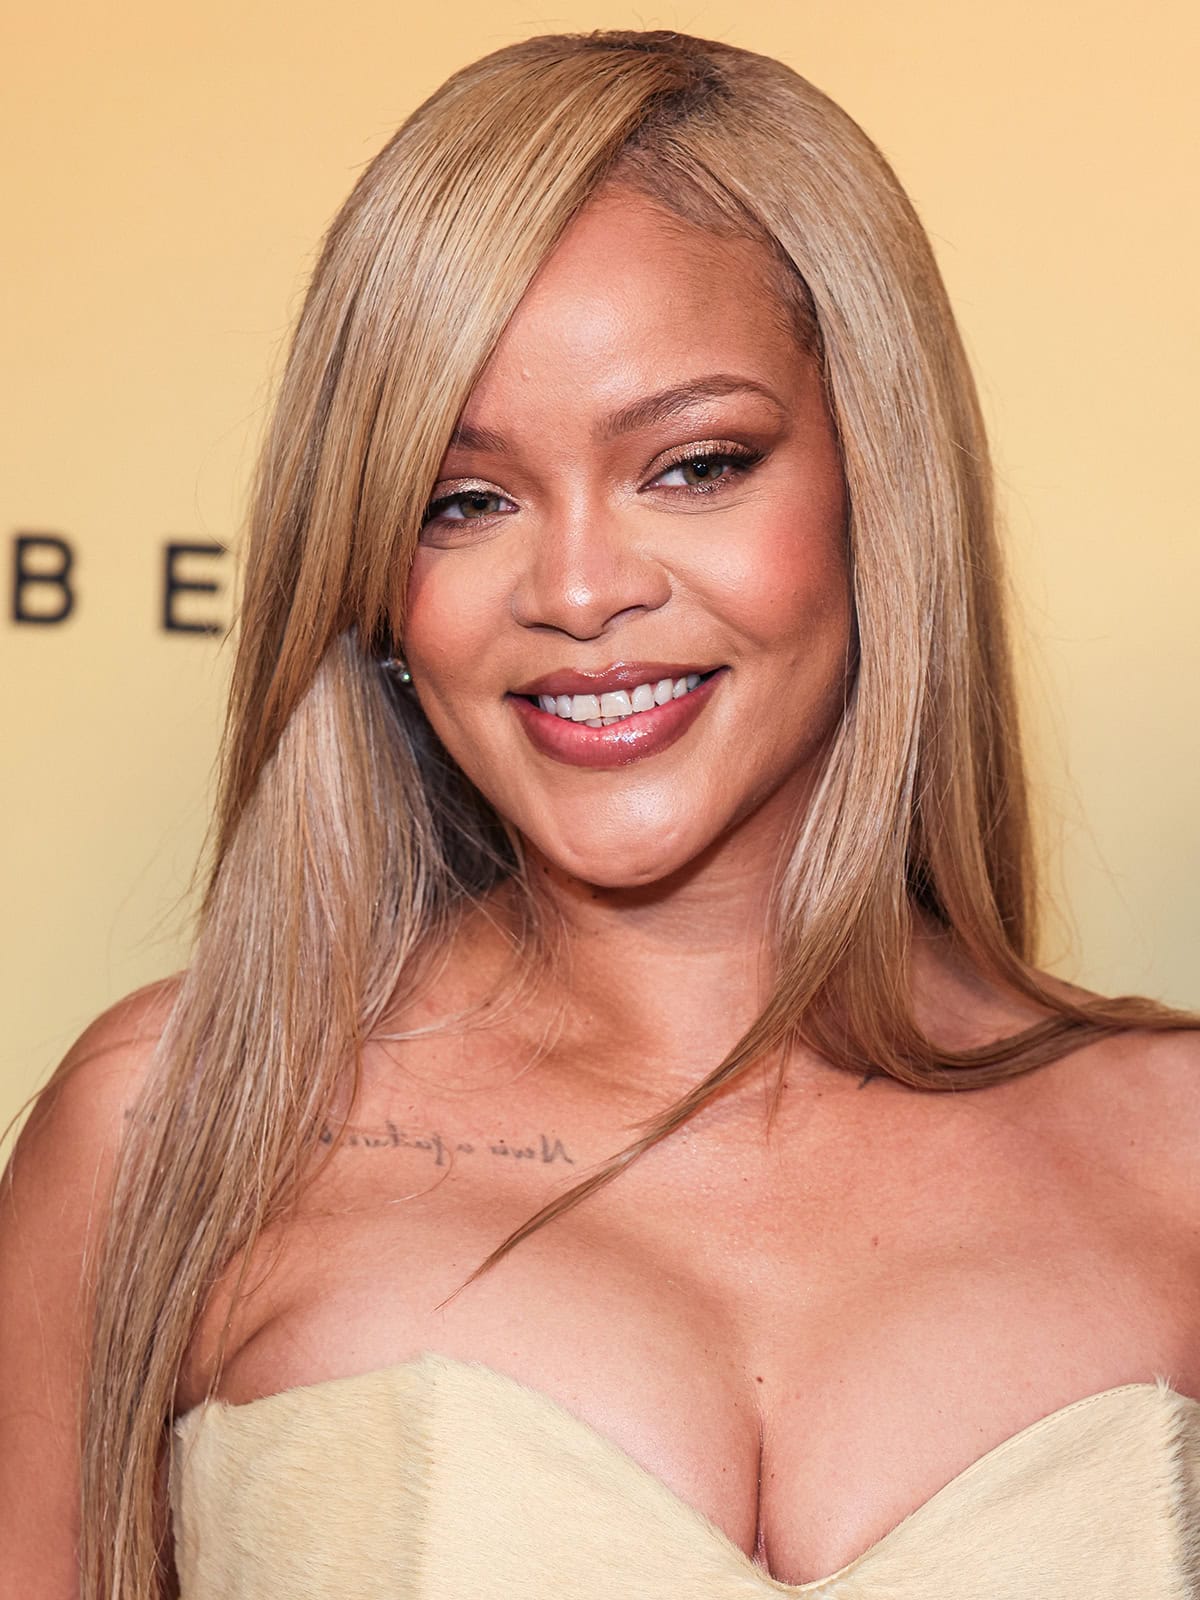 Rihanna uses Fenty Beauty makeup to achieve a golden hour glow and styles her blonde hair straight with a deep side part